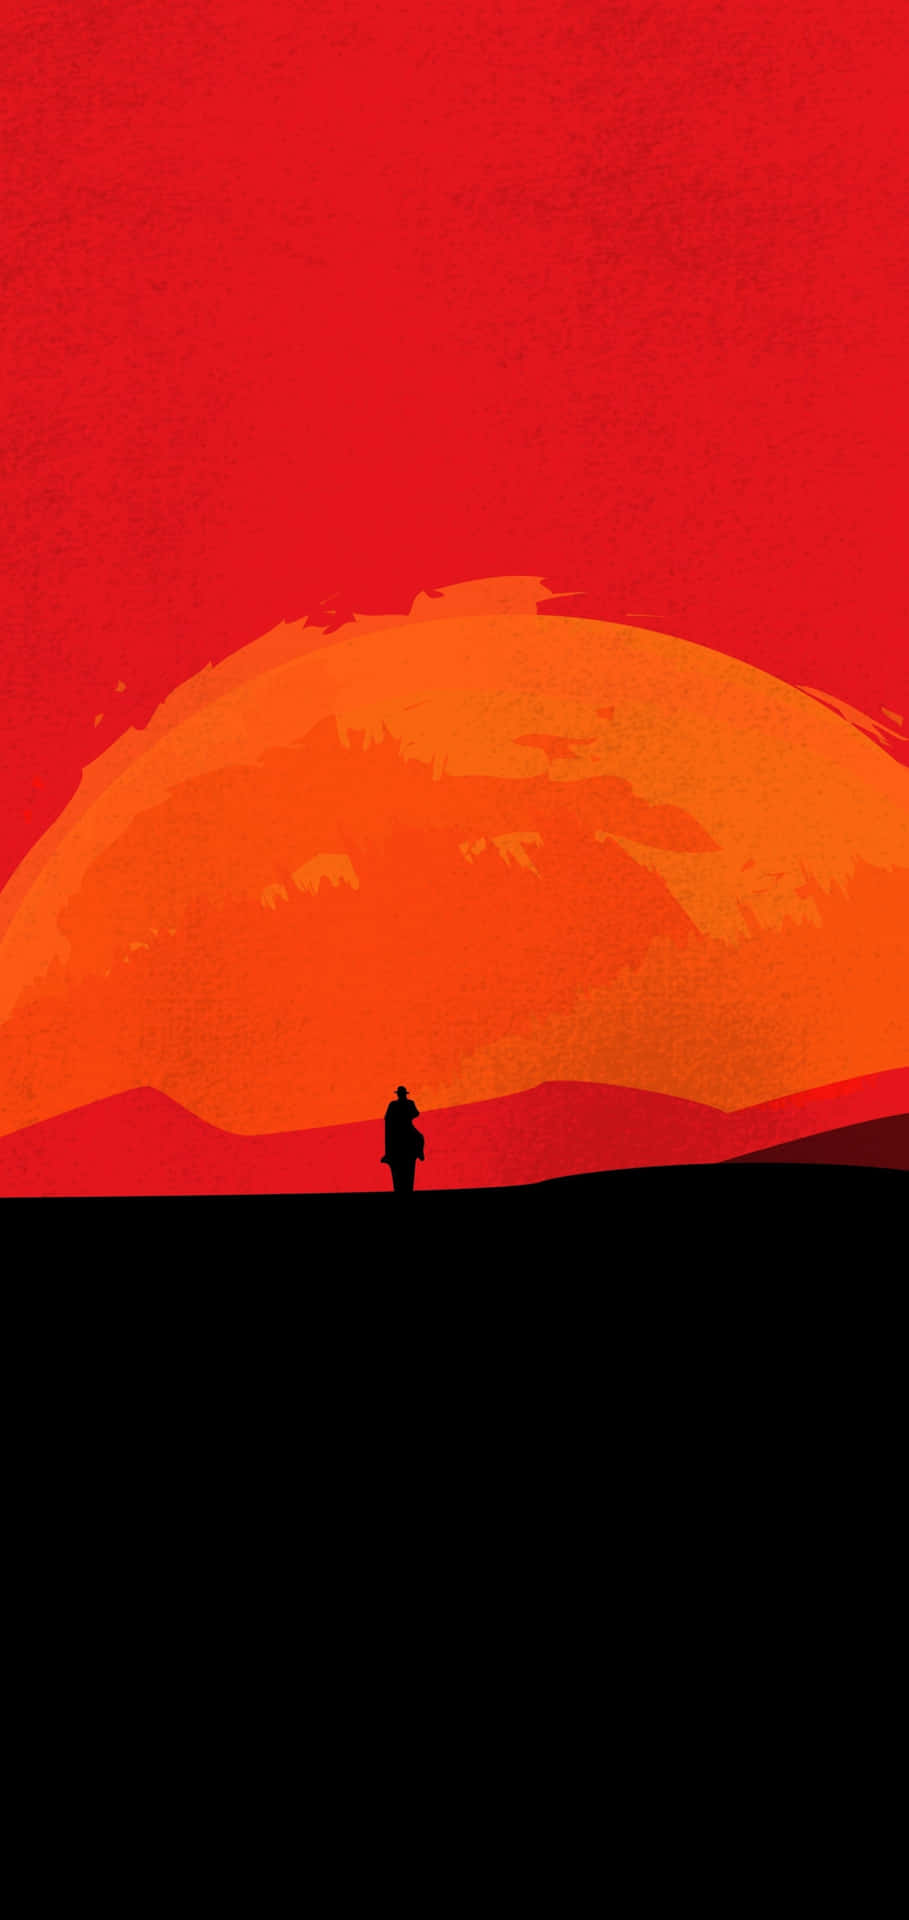 red dead redemption, red dead redemption wallpaper, red dead redemption wallpaper